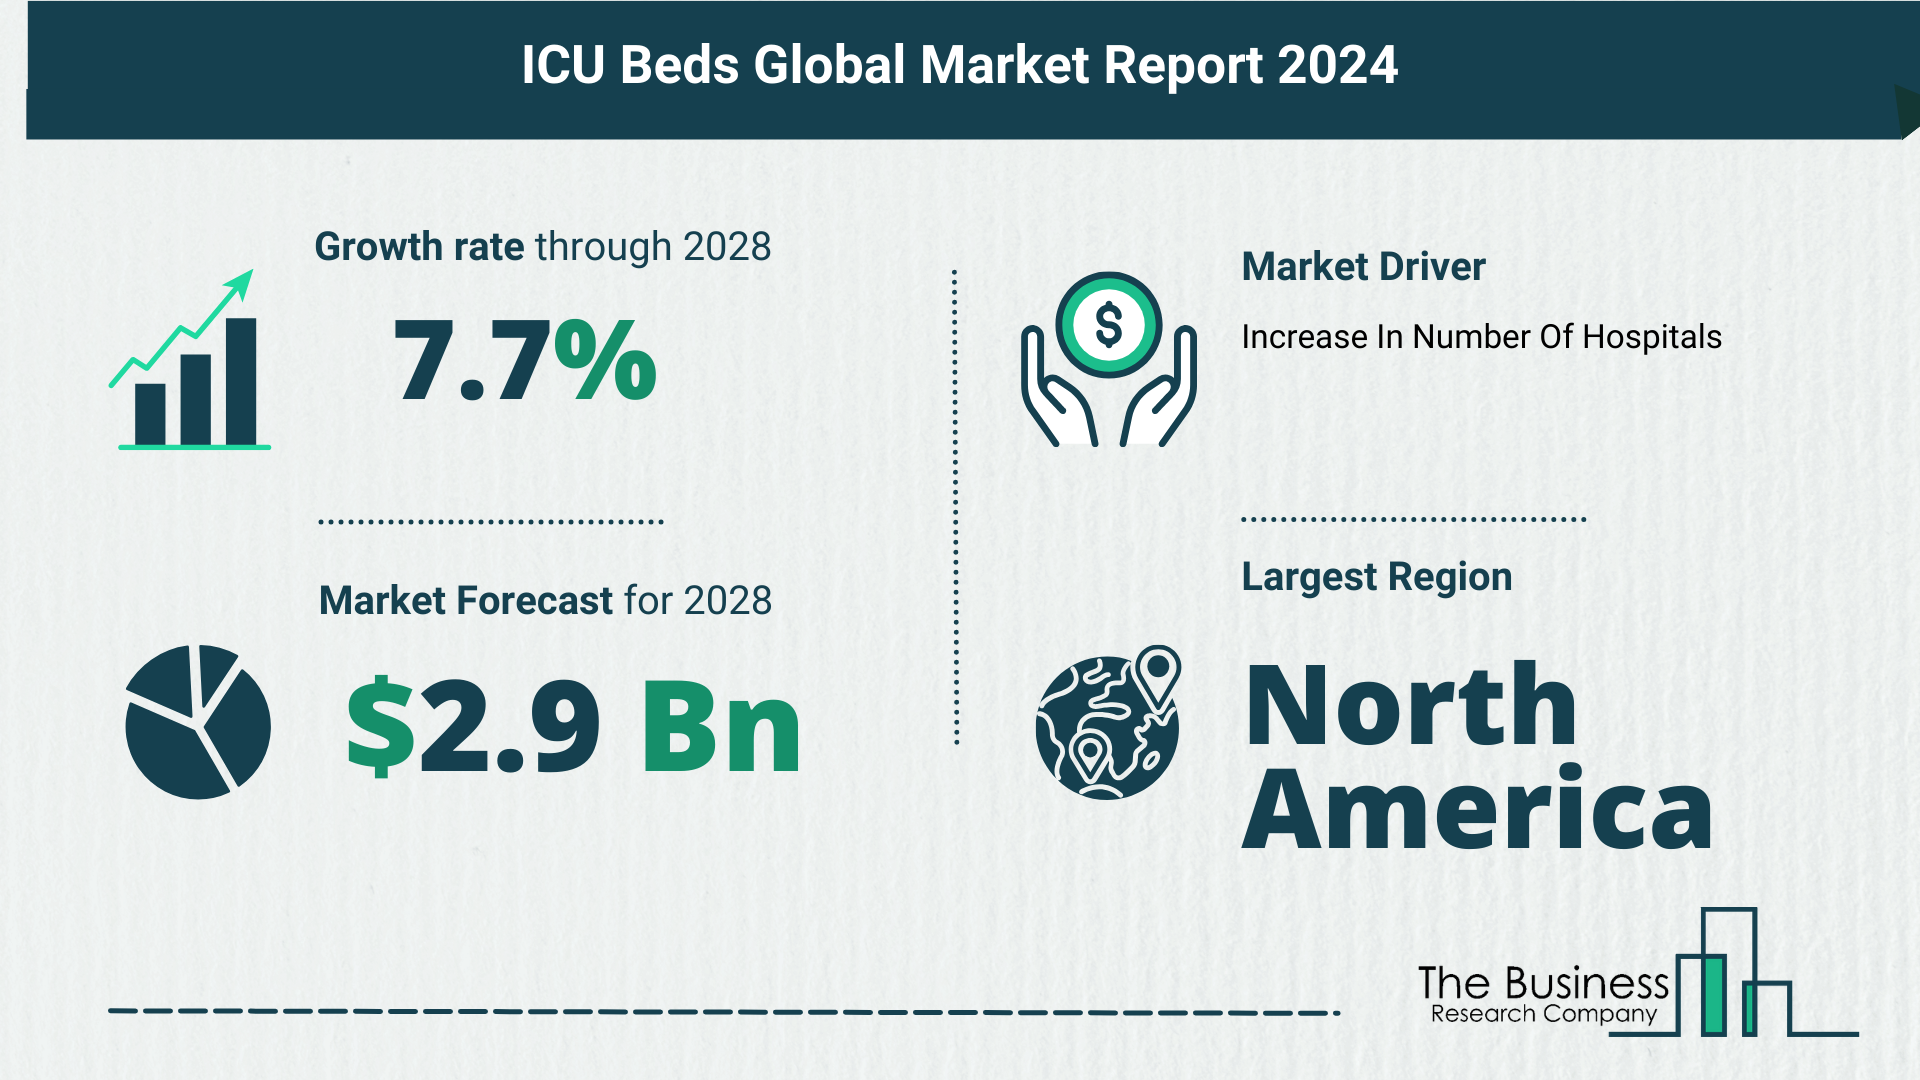 Top 5 Insights From The ICU Beds Market Report 2024